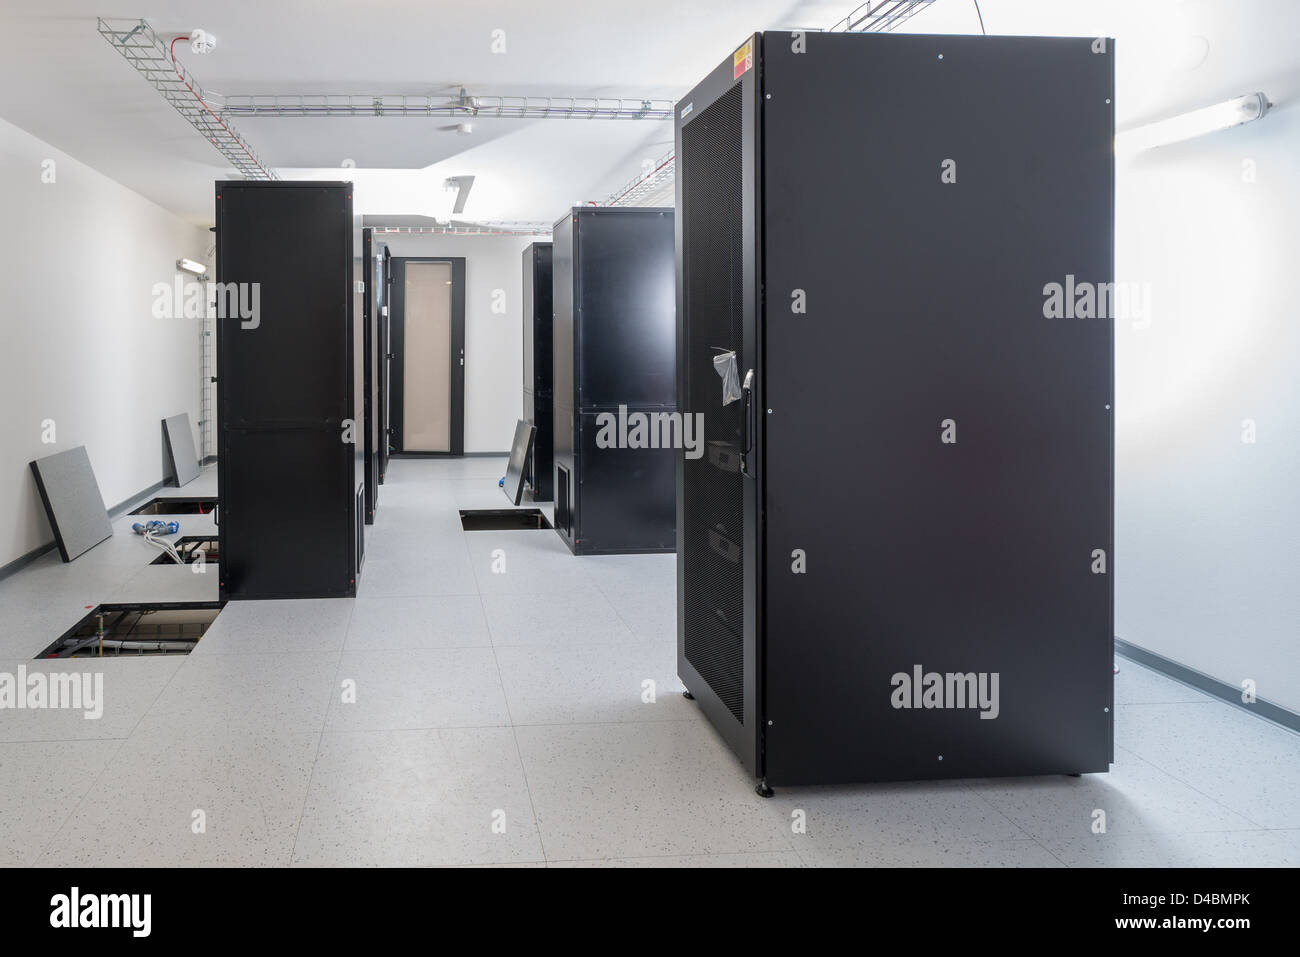 server room and data center Stock Photo